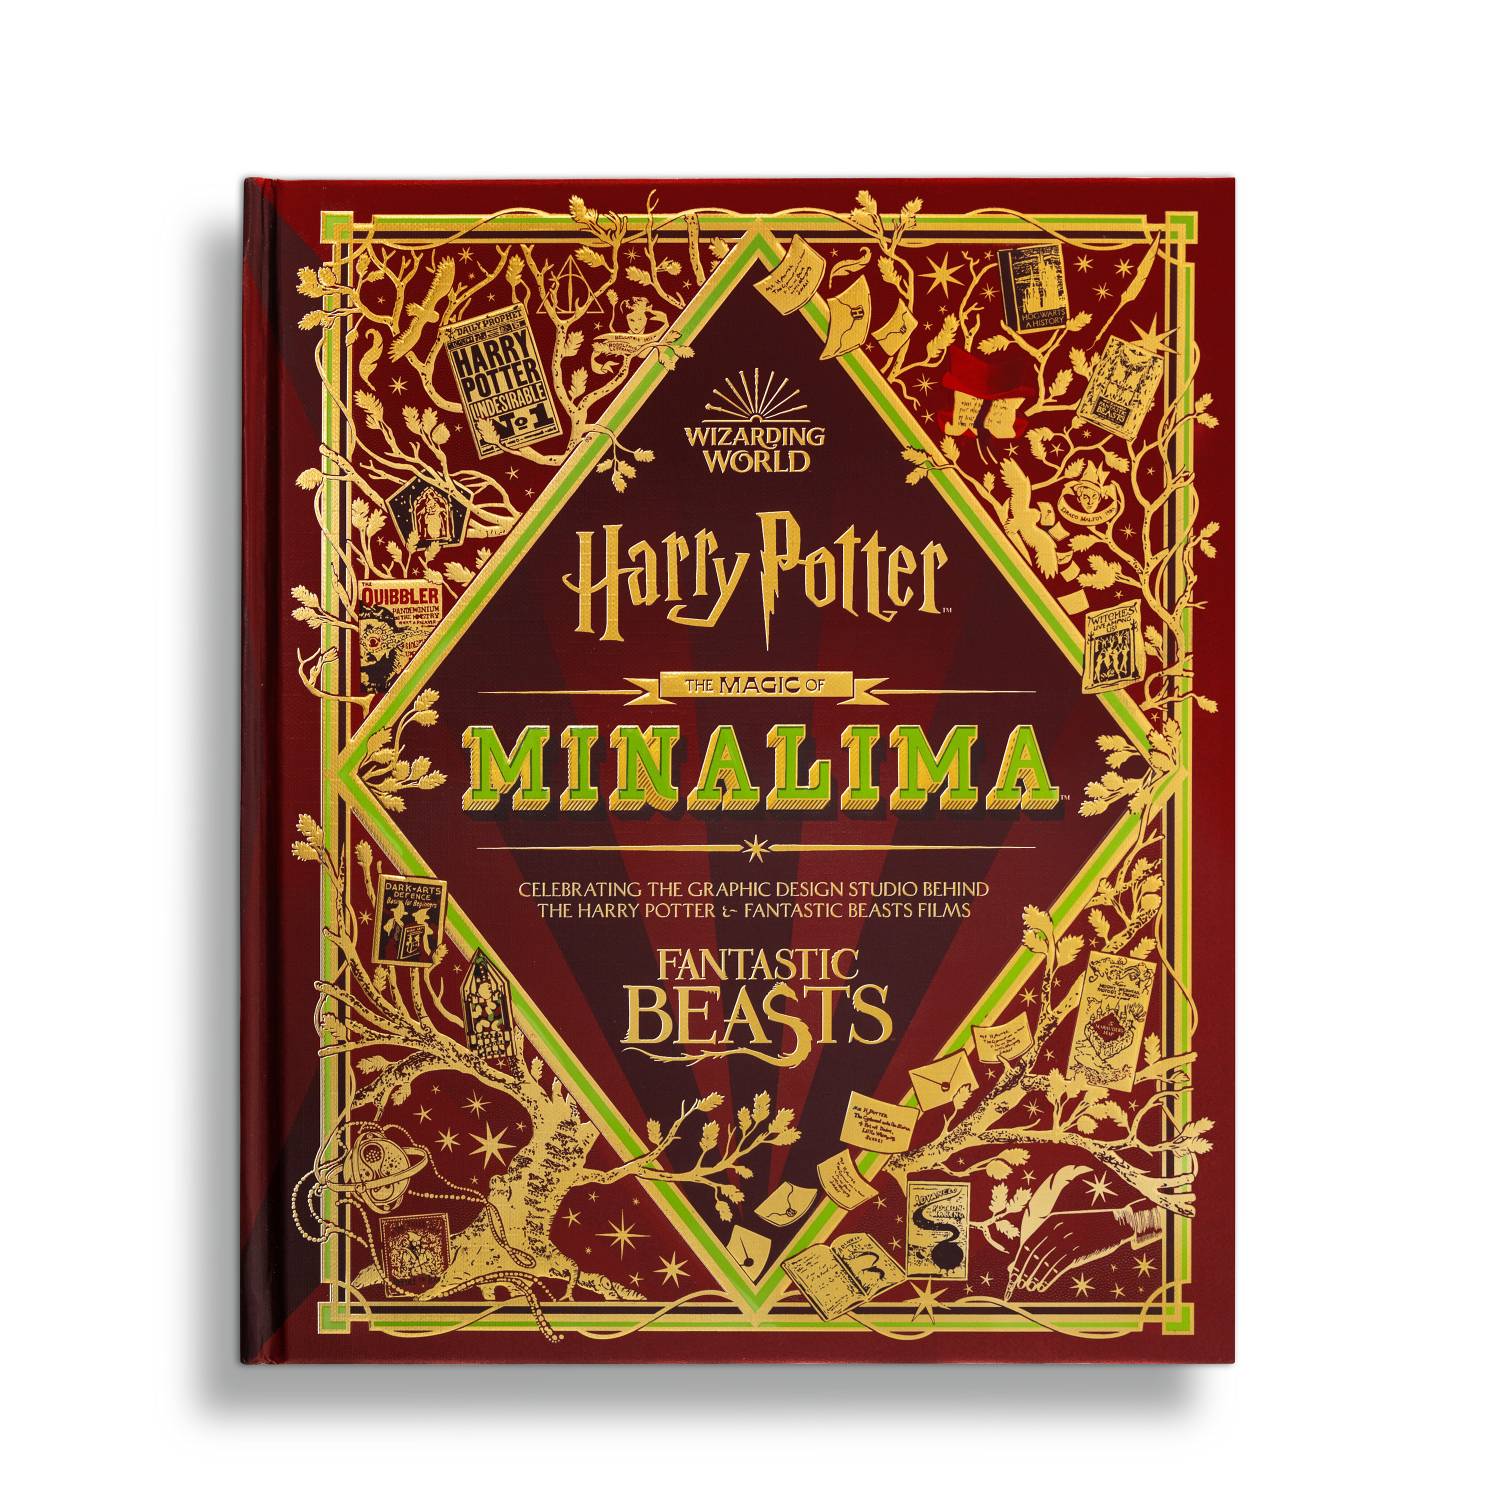 Thoughts on the MinaLima Editions of the First Two Harry Potter